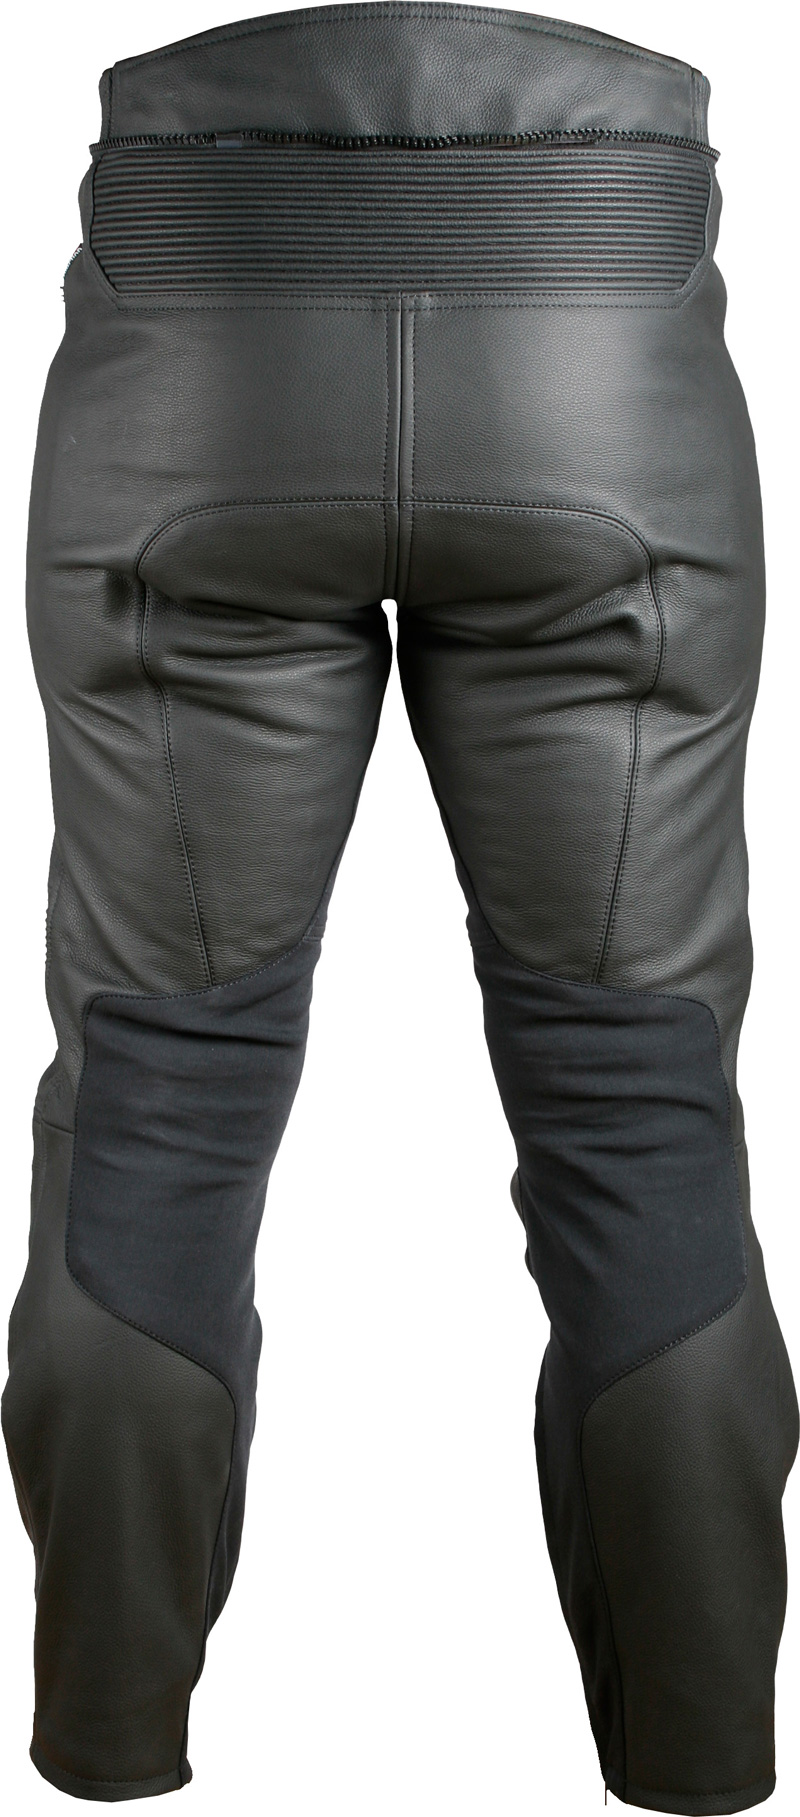 Weise Hydra Leather Waterproof Jeans | FREE UK DELIVERY